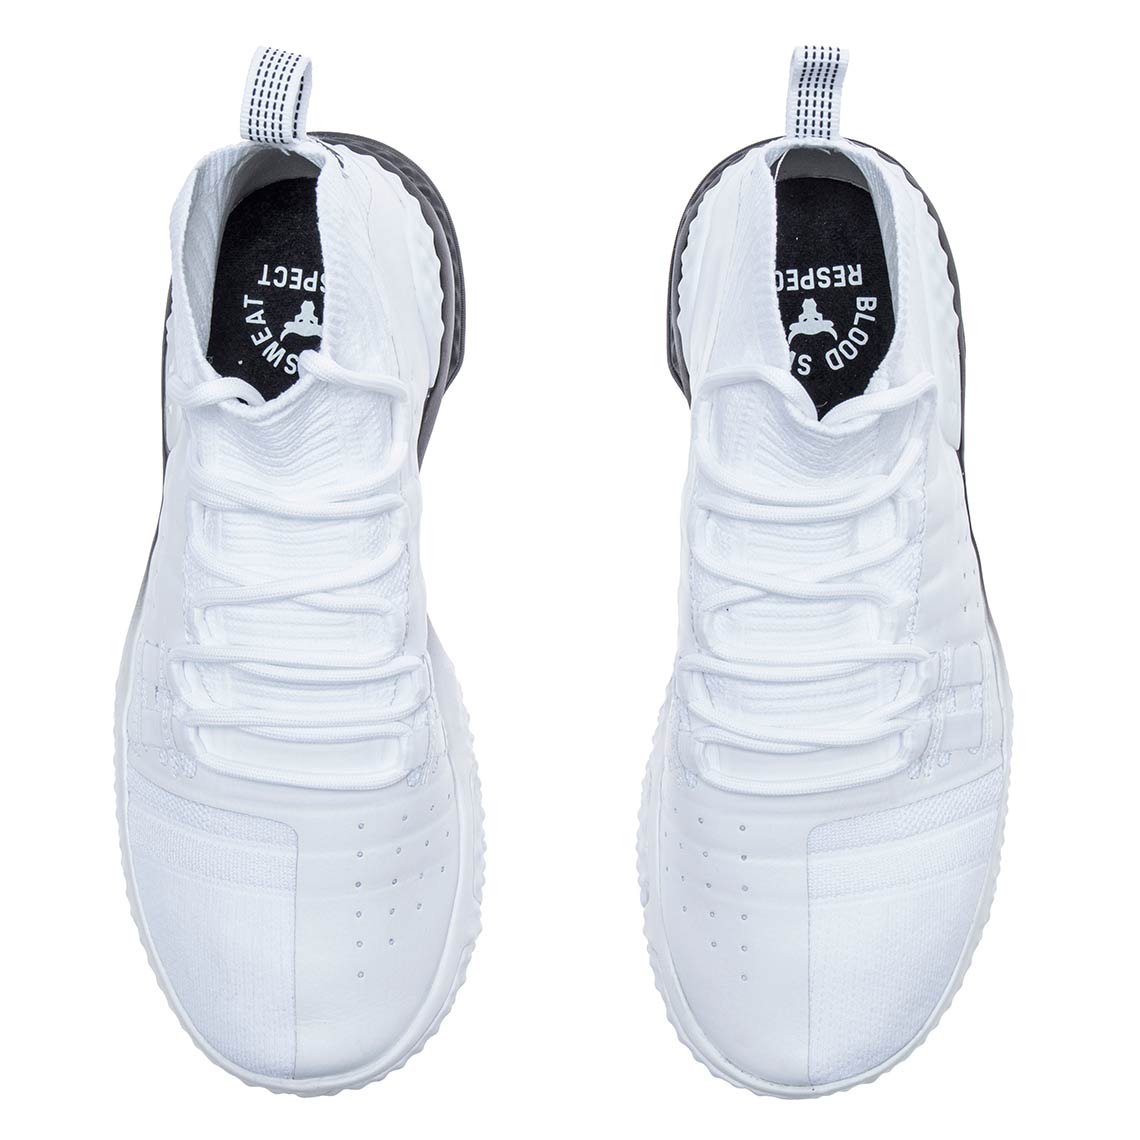 project rock 1 shoes white